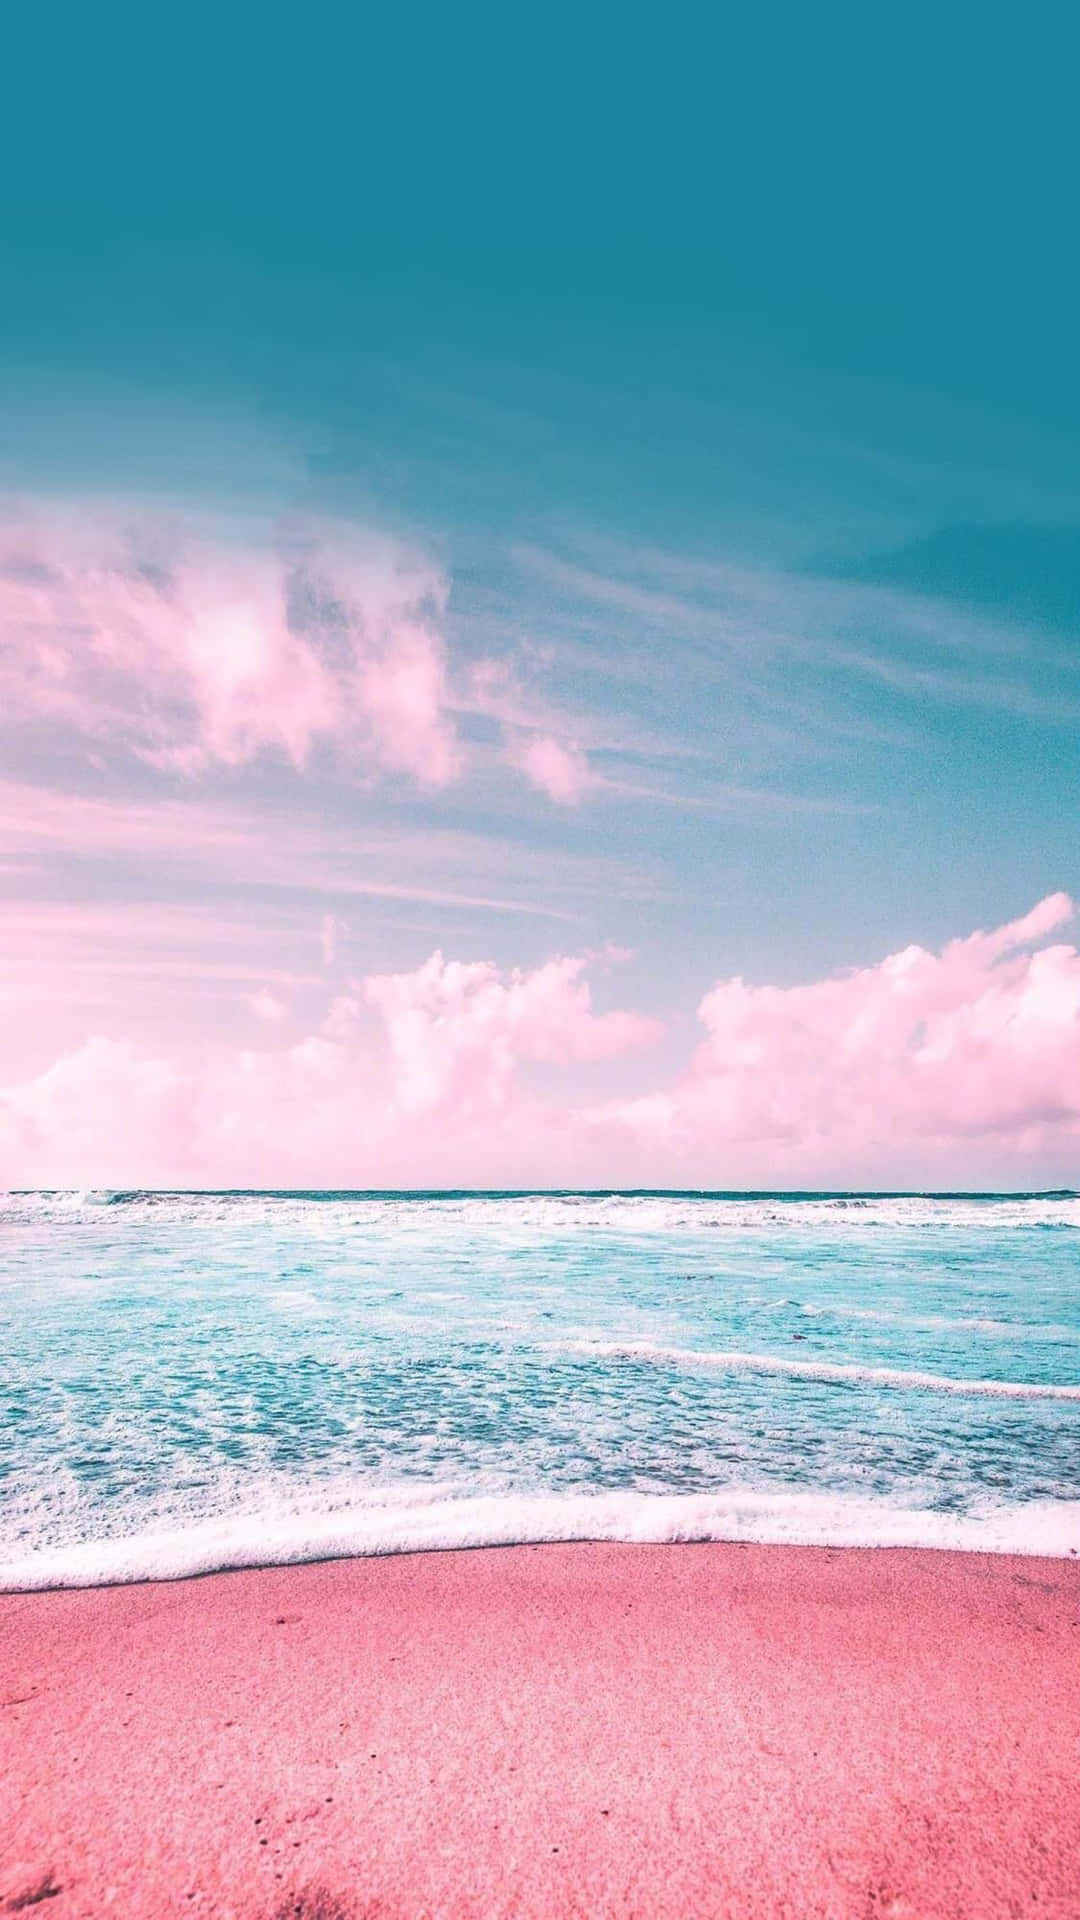 Feel the tropical serenity at the stunning Pink Sand Beach Wallpaper